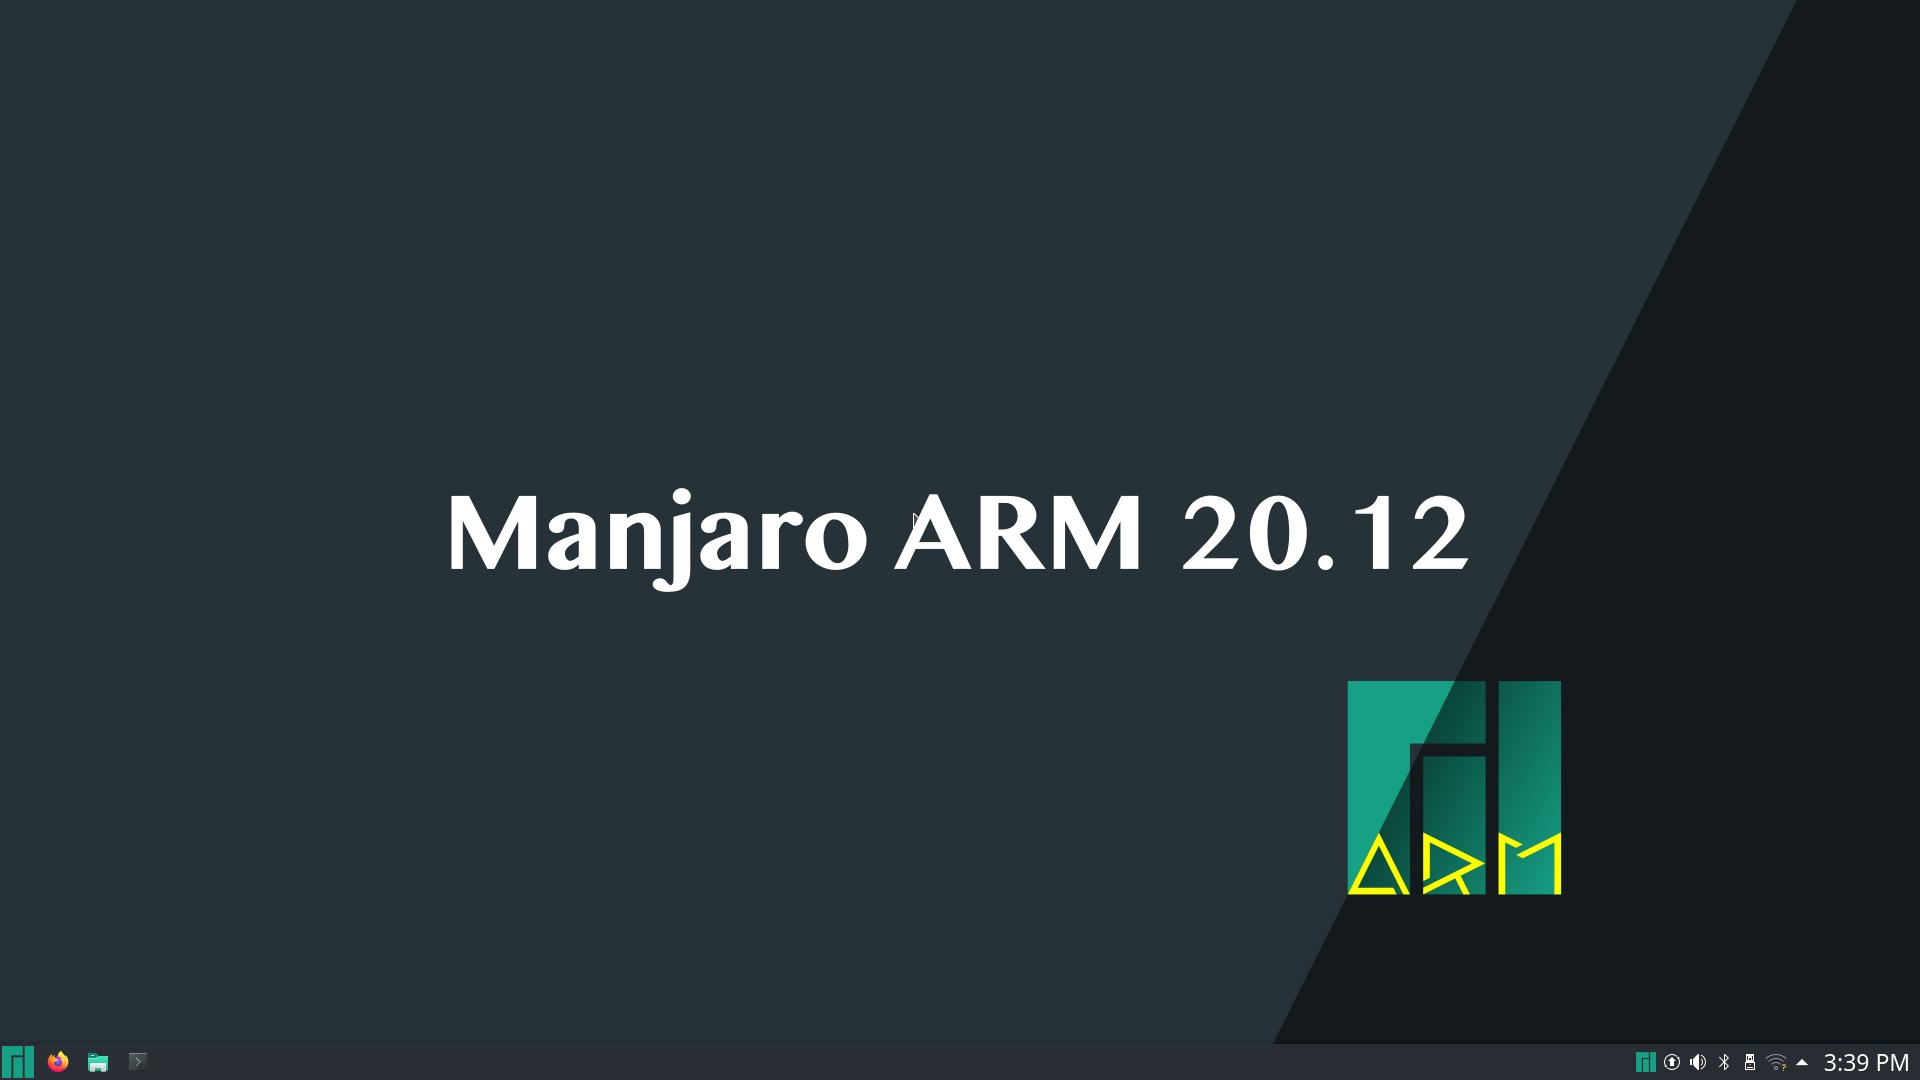 Manjaro ARM 20.12 Released with KDE Plasma 5.20, New App for Flashing Images